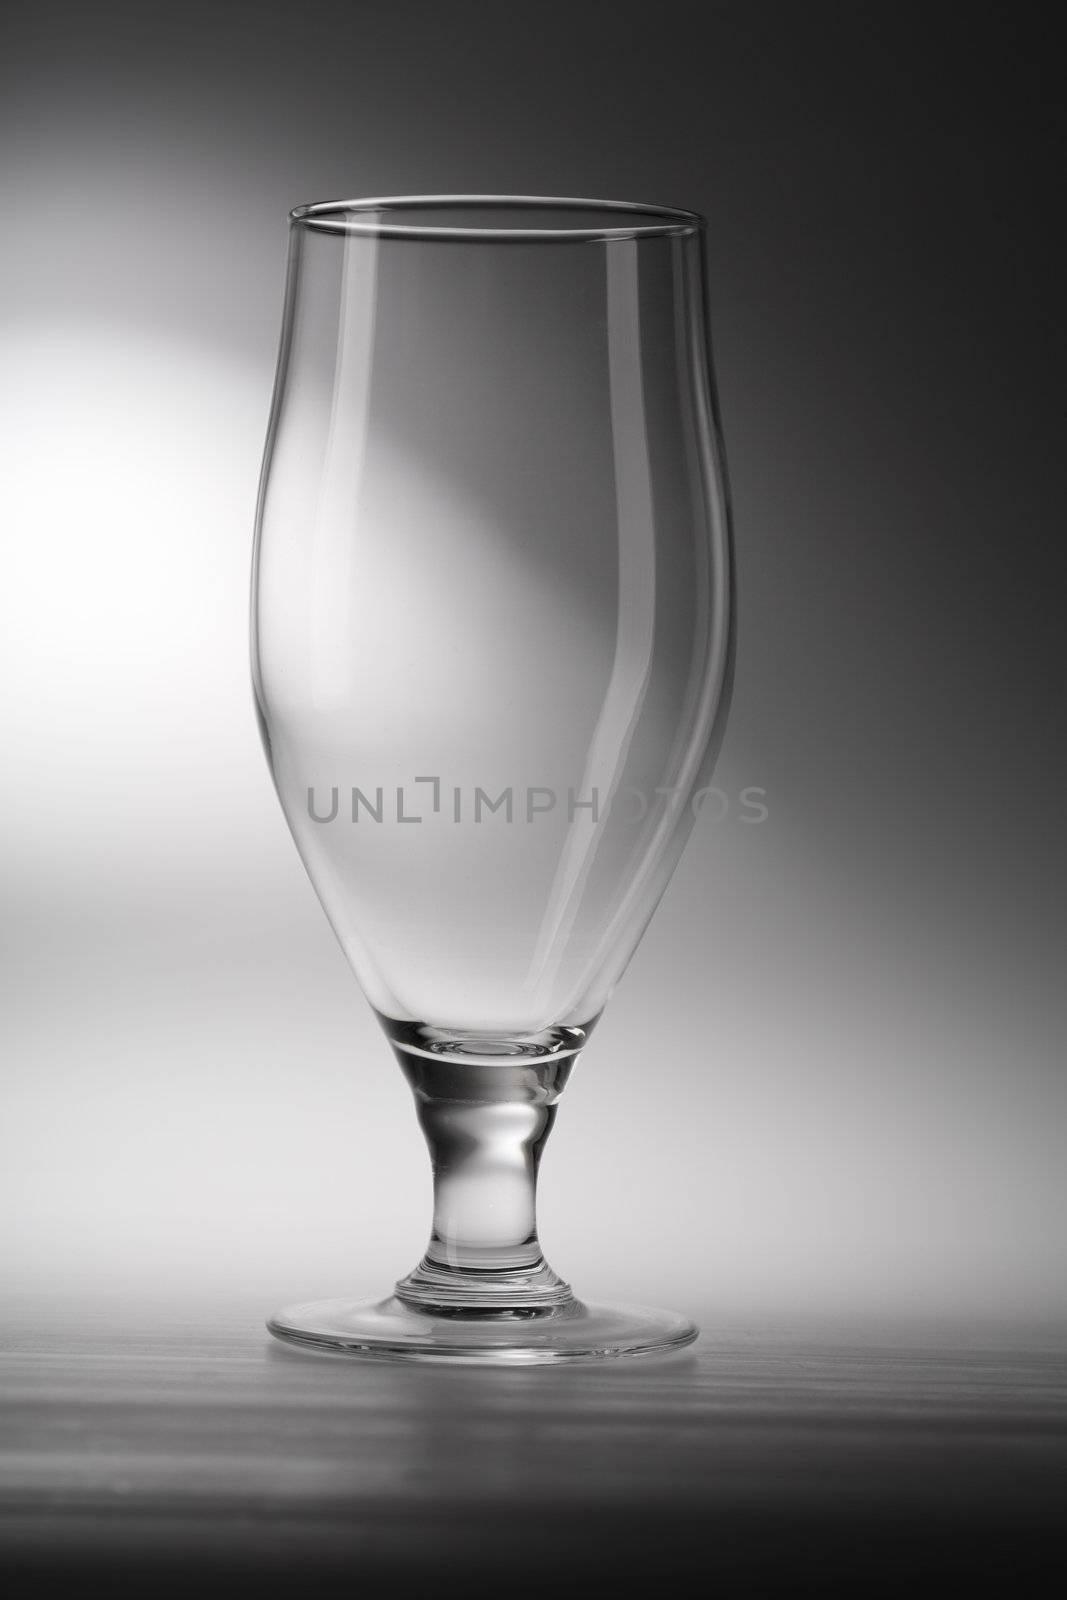 Beer glass by Stocksnapper